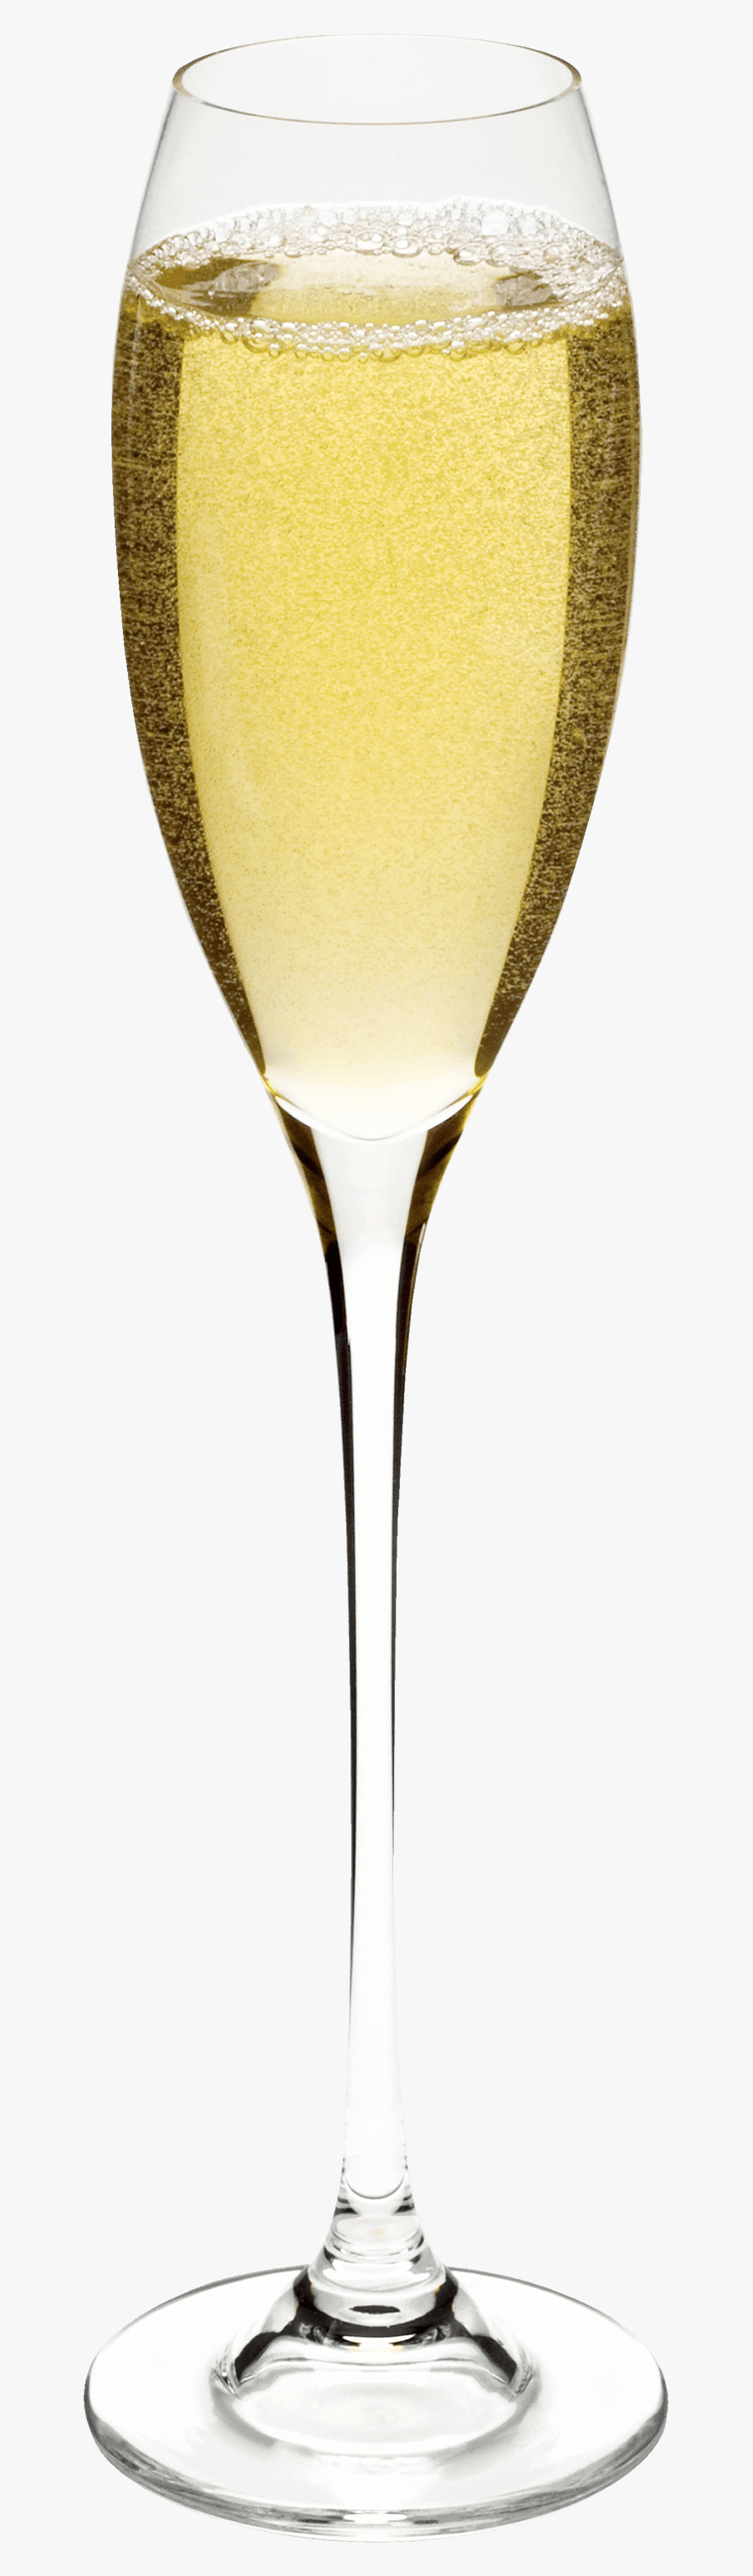 Champagne Glass - Champagne Glass Png Hd, Transparent Clipart